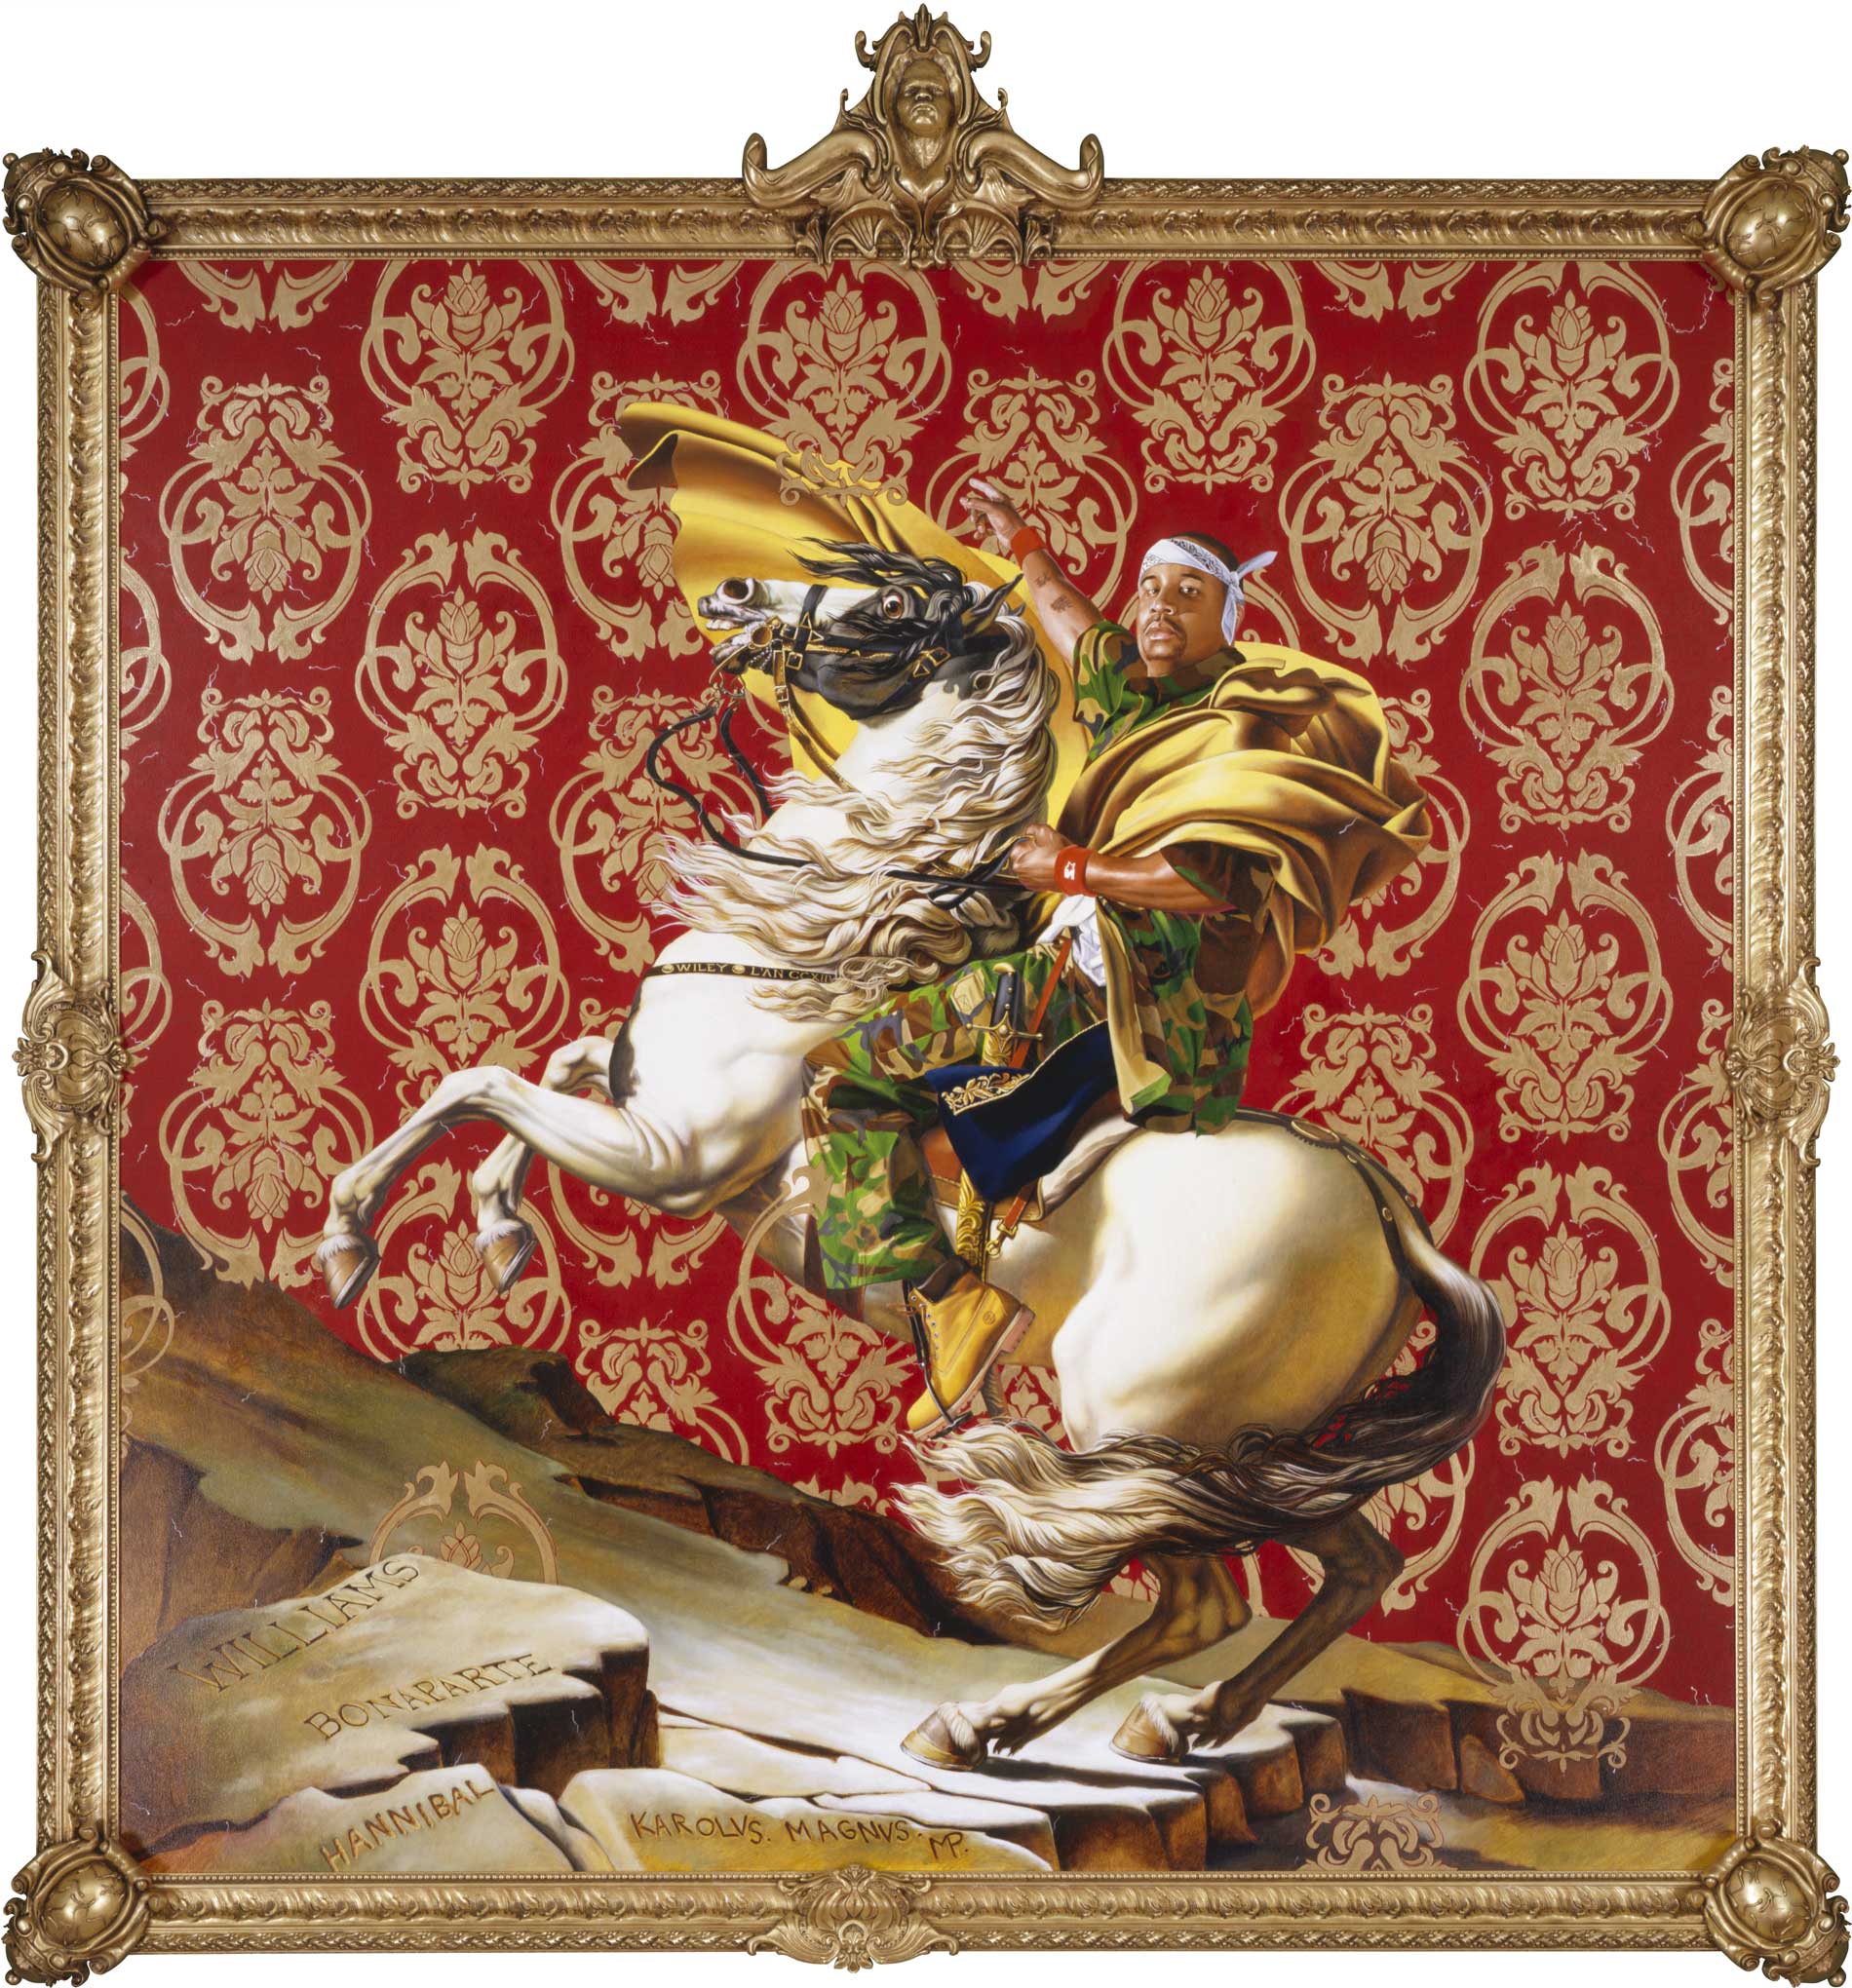 Kehinde Wiley | A New Republic, Brooklyn Museum, New York City, USA,  February 20- May 24, 2015 | Napoleon Leading the Army Over the Alps, 2005 Oil and Enamel on Canvas. | 16